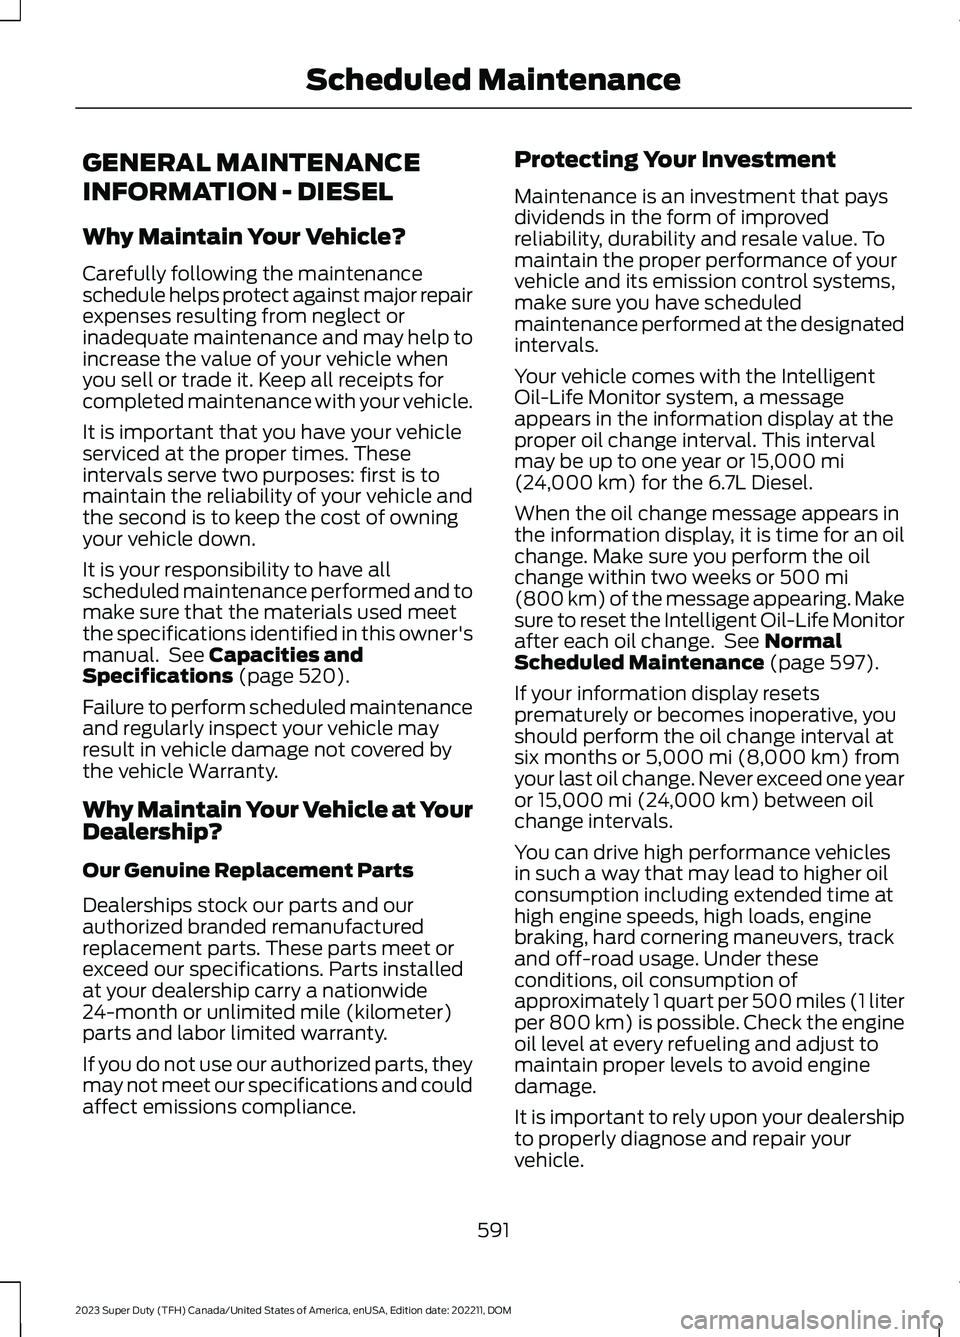 FORD SUPER DUTY 2023  Owners Manual GENERAL MAINTENANCE
INFORMATION - DIESEL
Why Maintain Your Vehicle?
Carefully following the maintenanceschedule helps protect against major repairexpenses resulting from neglect orinadequate maintenan